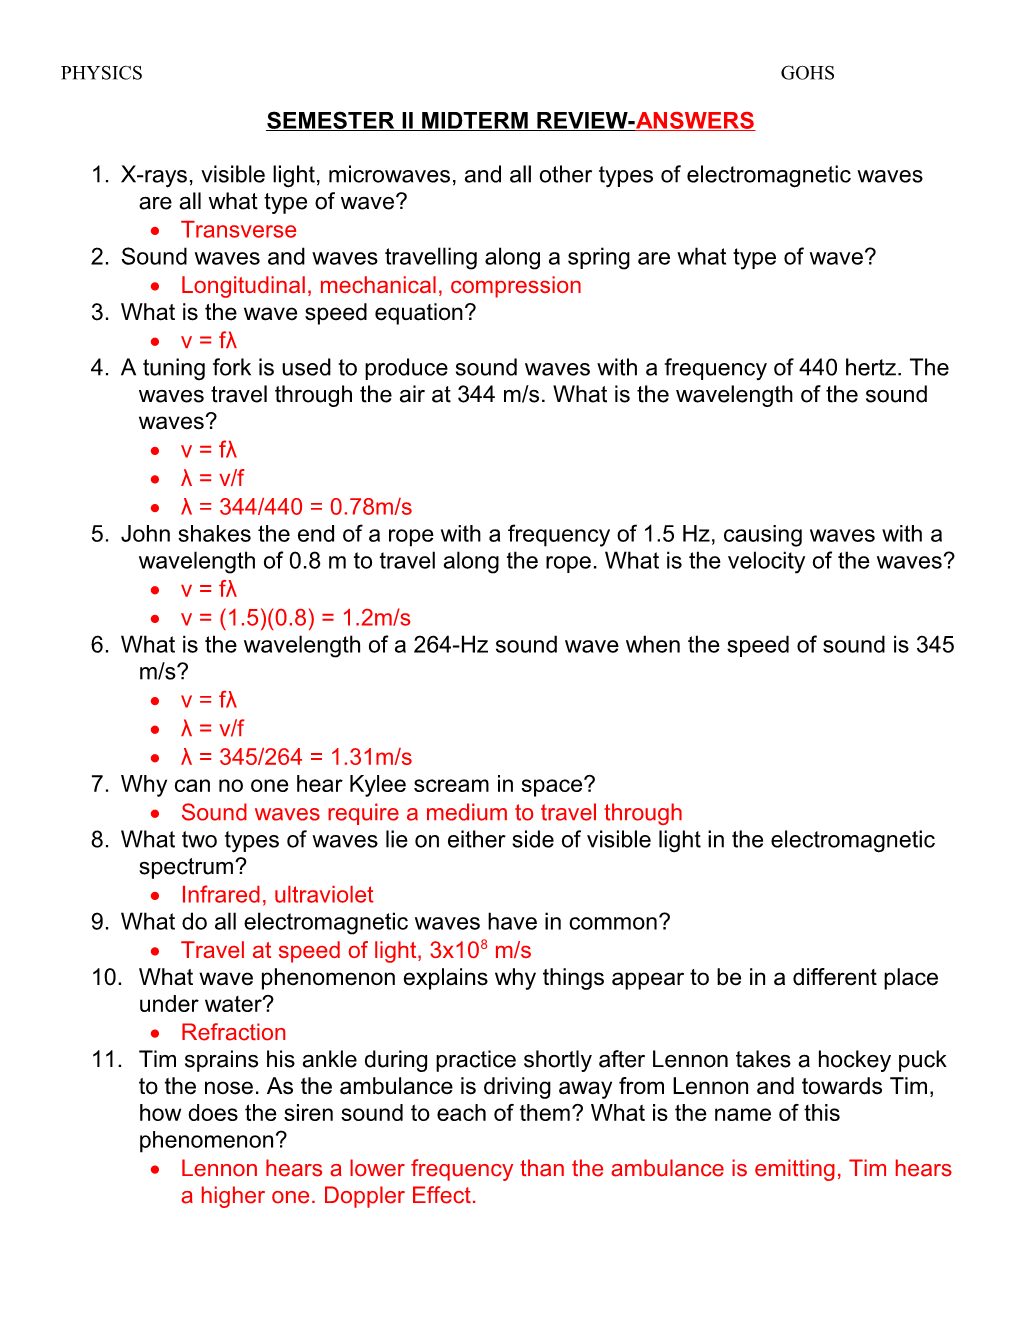 Semester Ii Midterm Review-Answers